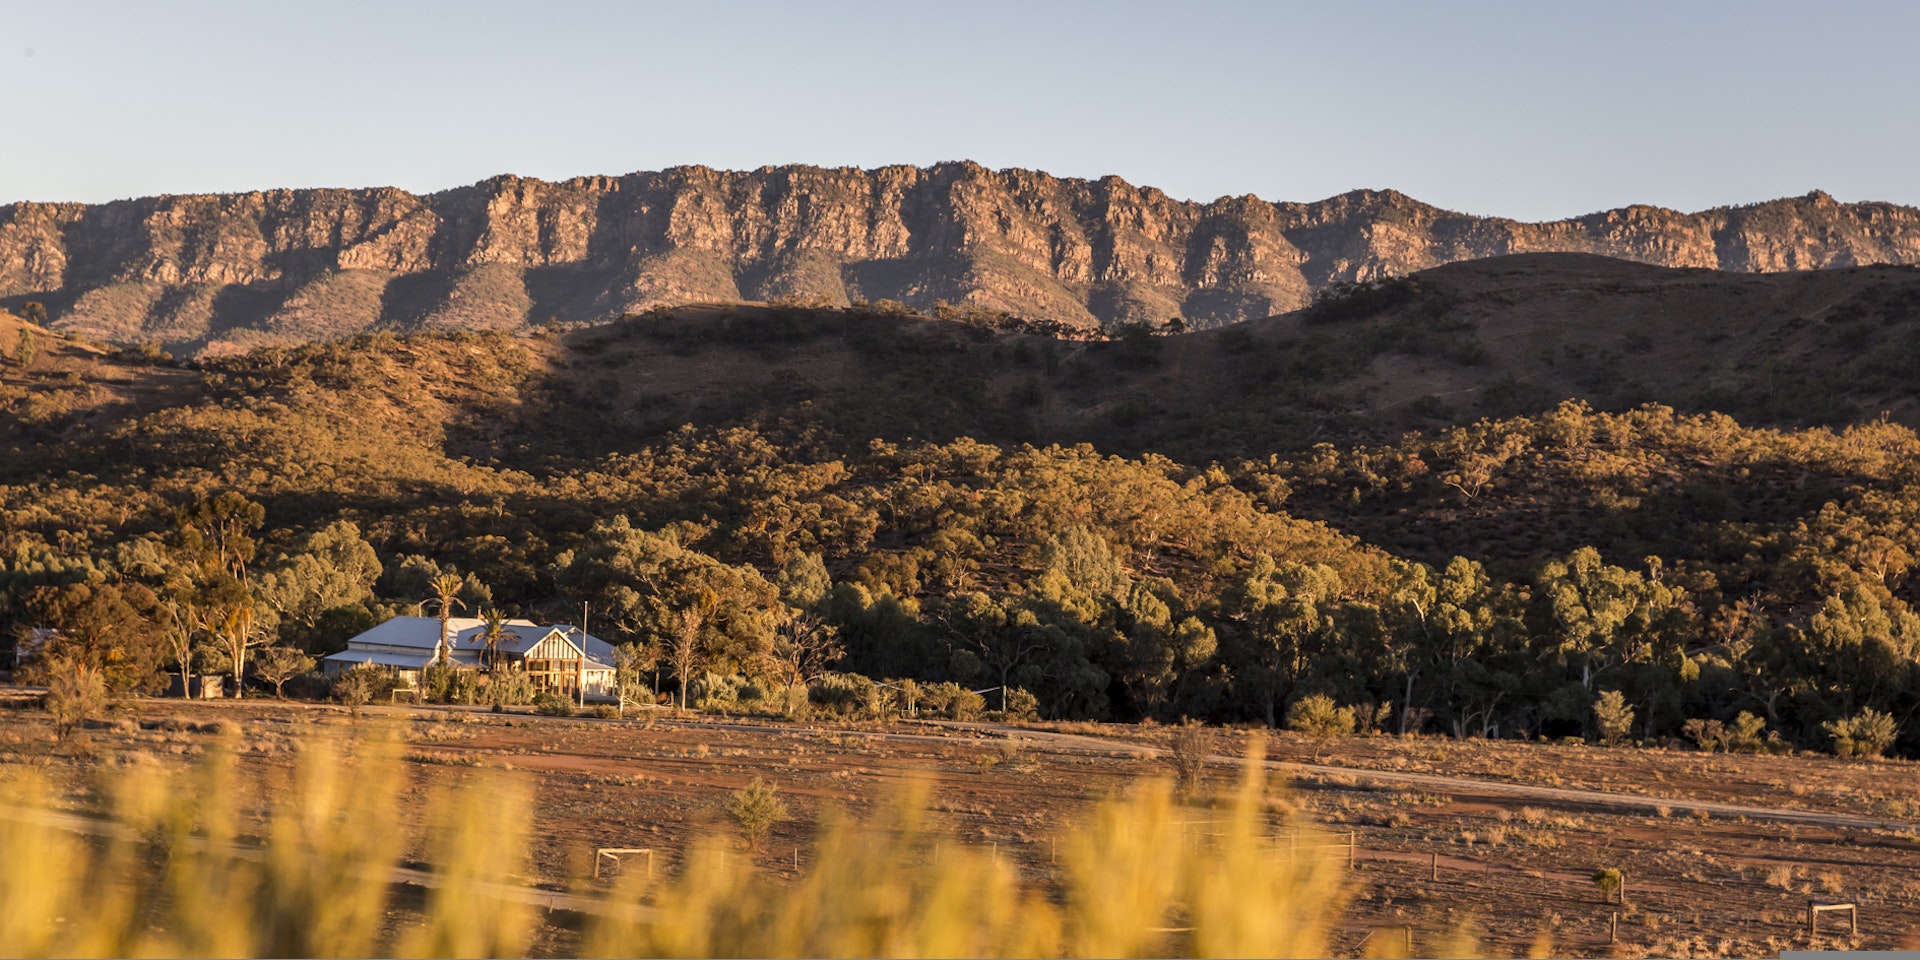 The homestead of the Arkaba Conservancy in South Australia with the Flinders mountains in the background